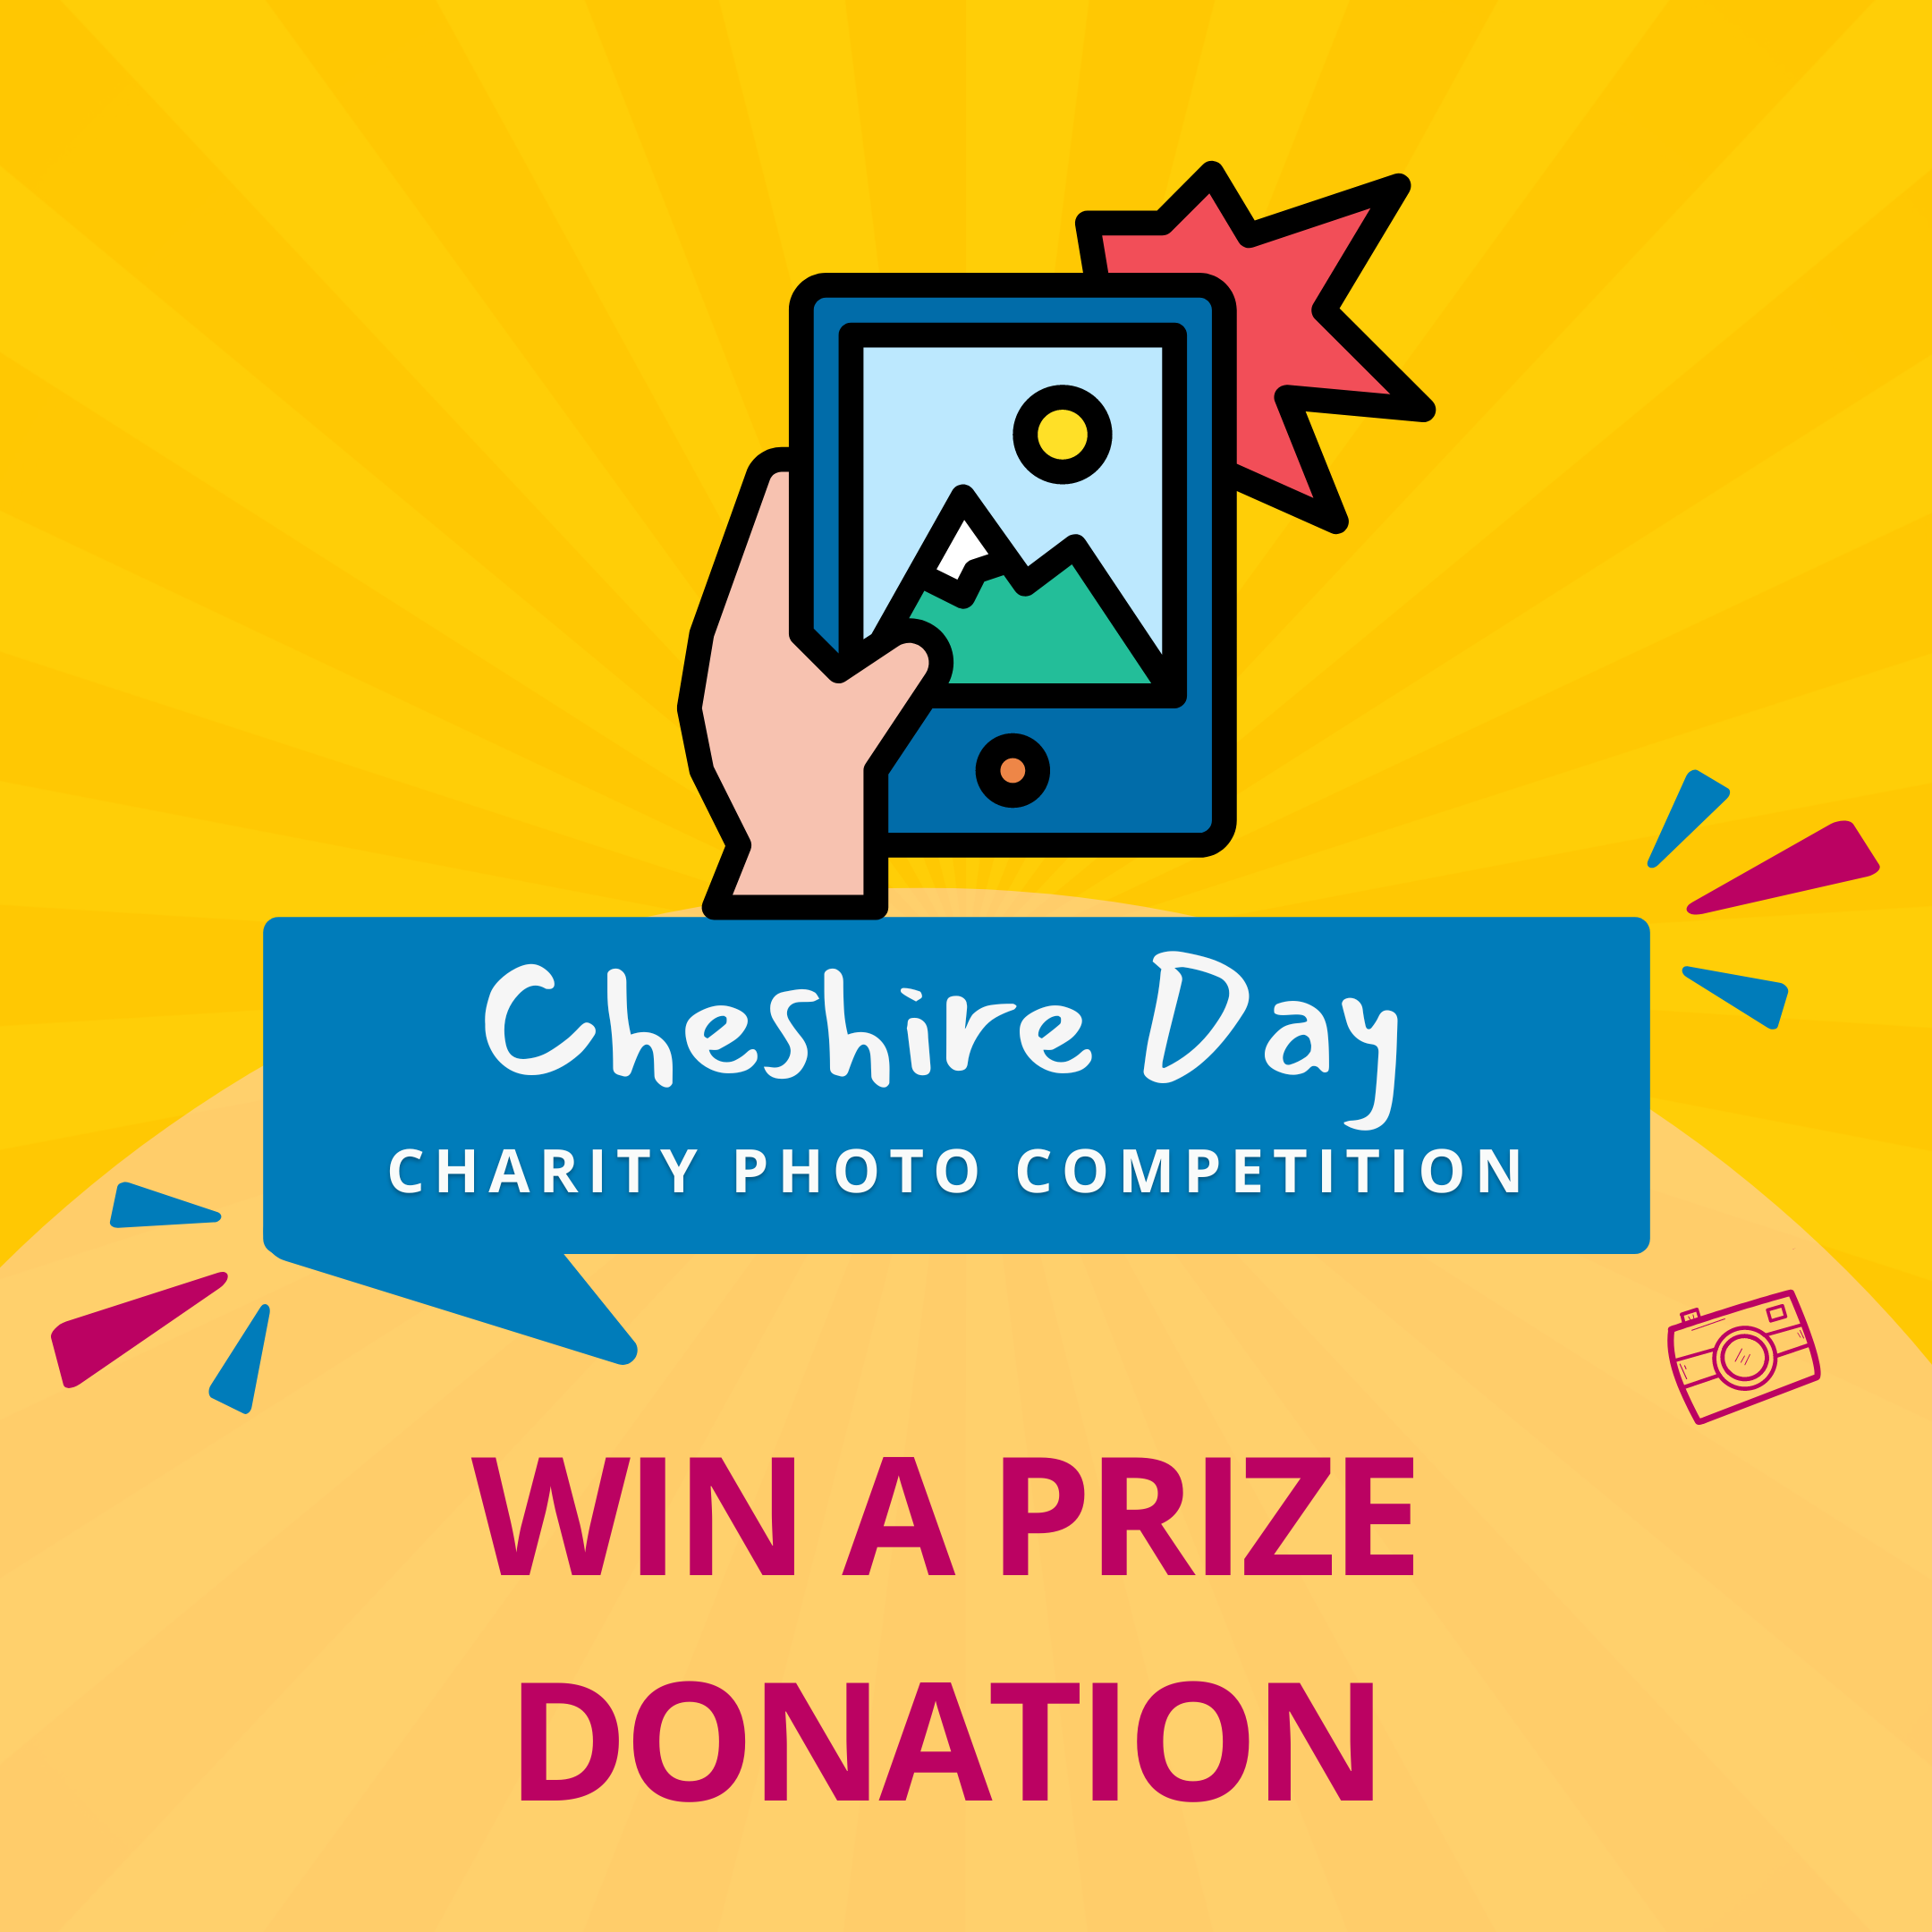 Cheshire day charity photo competition